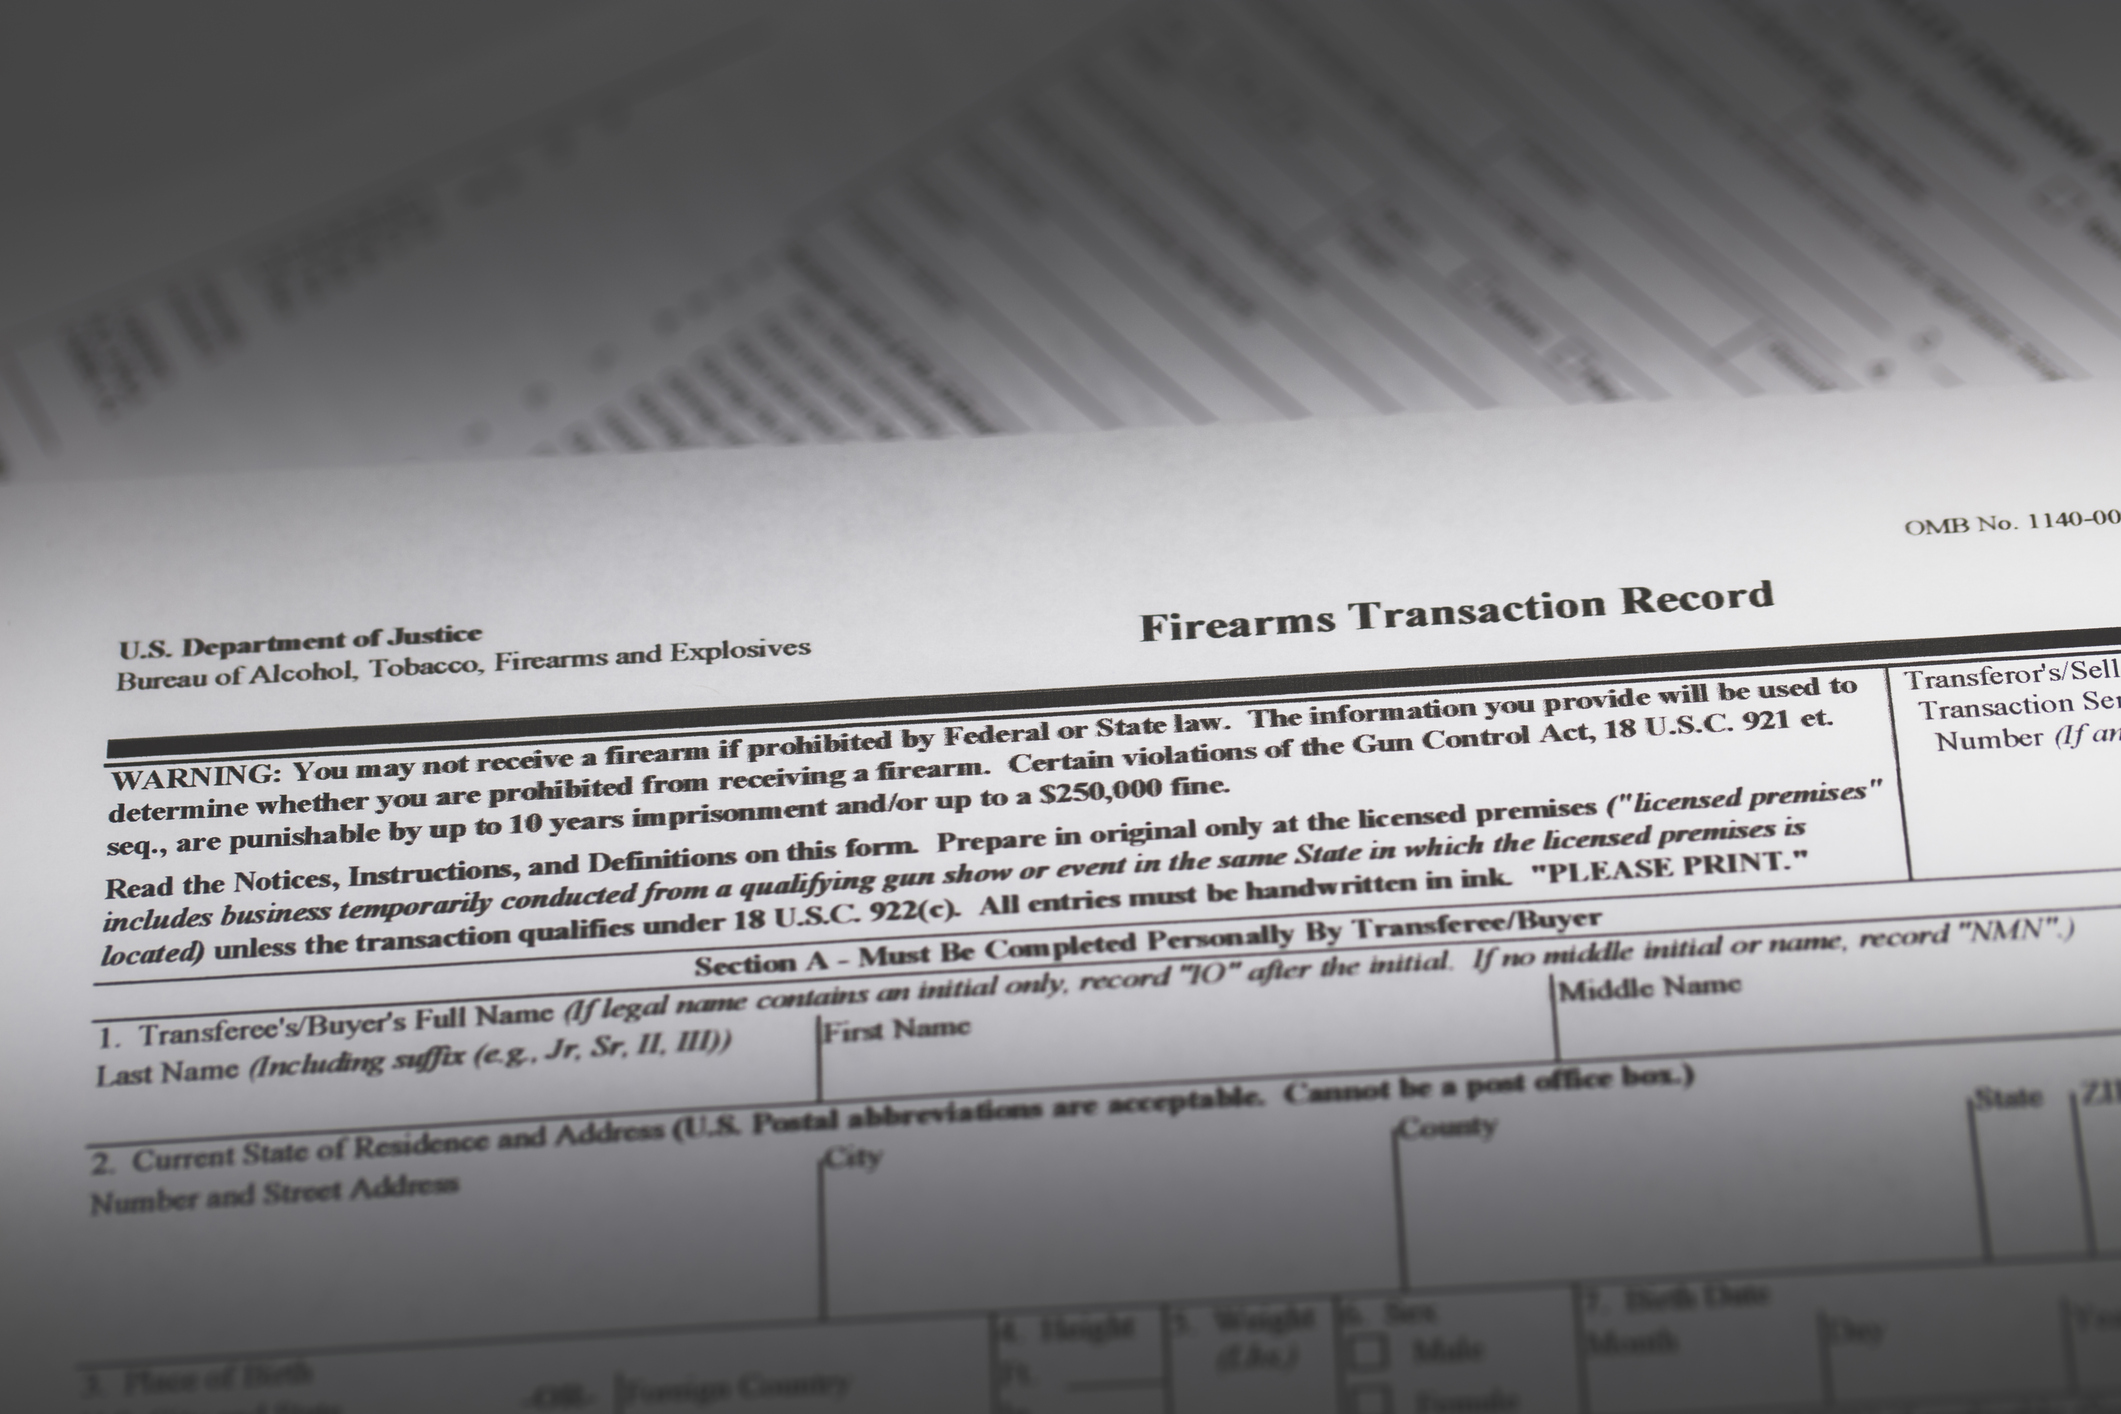 A paper copy of a firearms transaction record